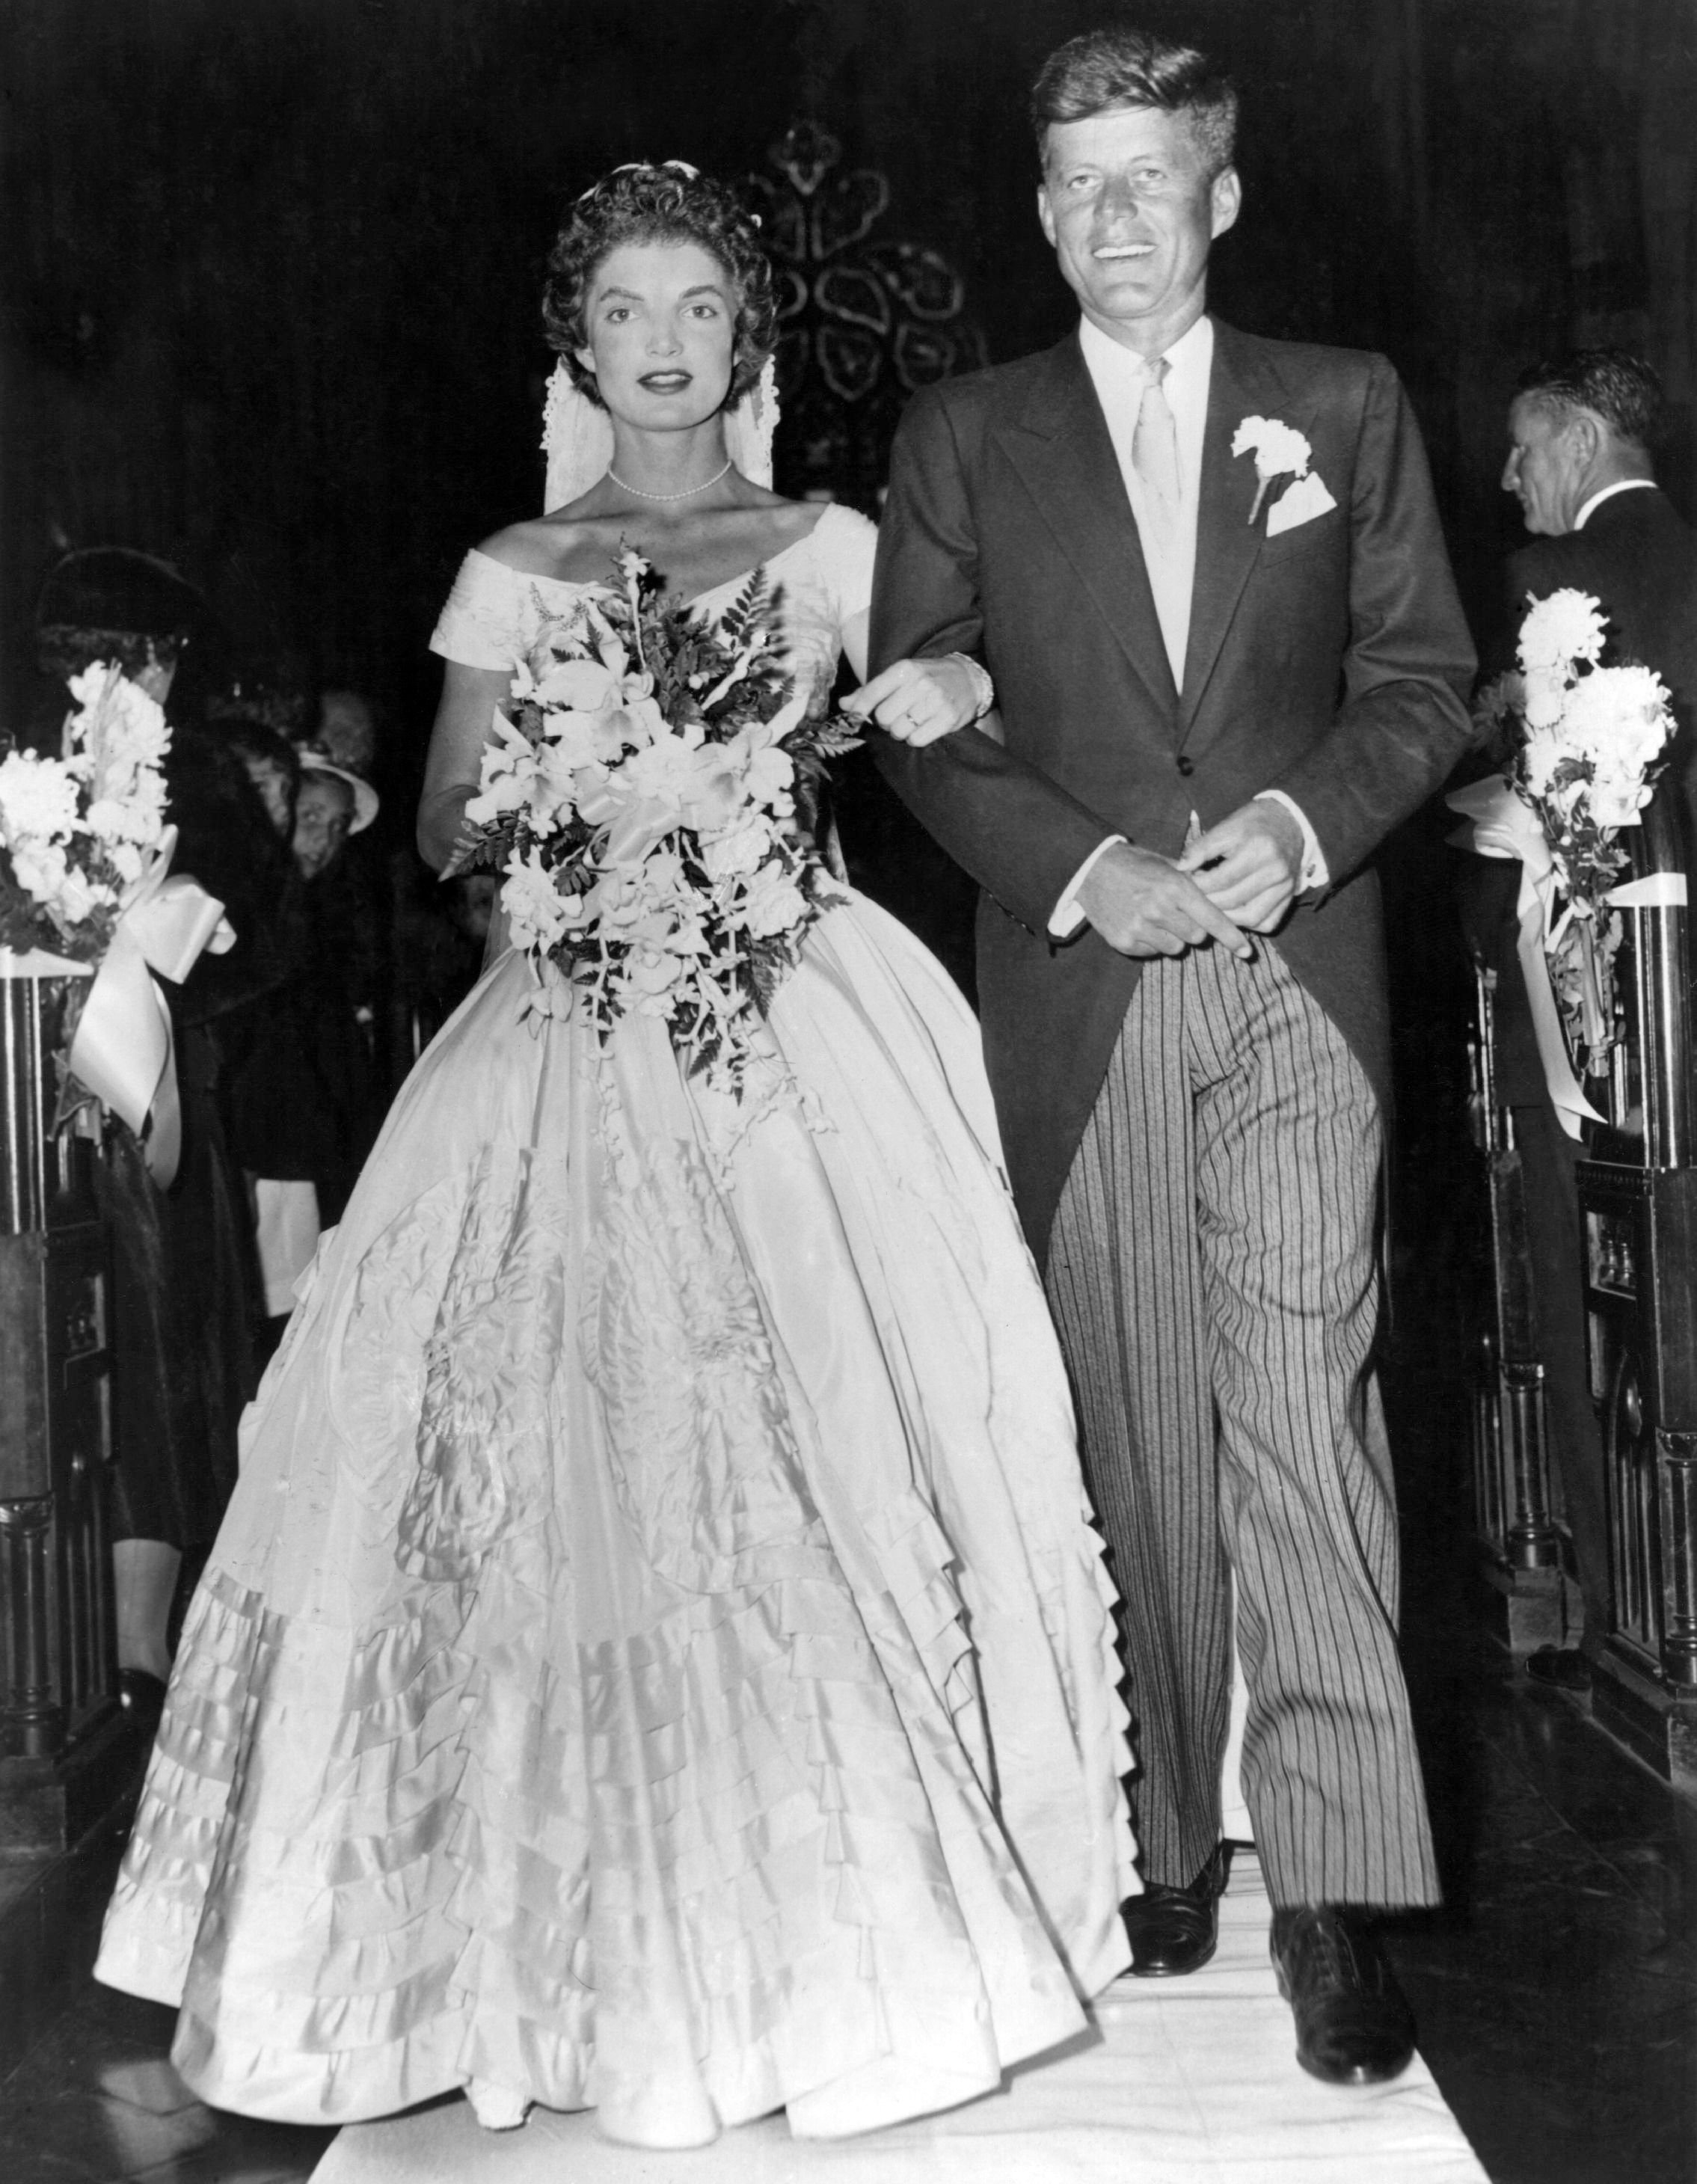 Jacqueline Lee Bouvier and Senator John Fitzgerald Kennedy walk down the church aisle shortly after their wedding ceremony at Newport, Rhode Island on September 12, 1953. | Source: Keystone/Getty Images